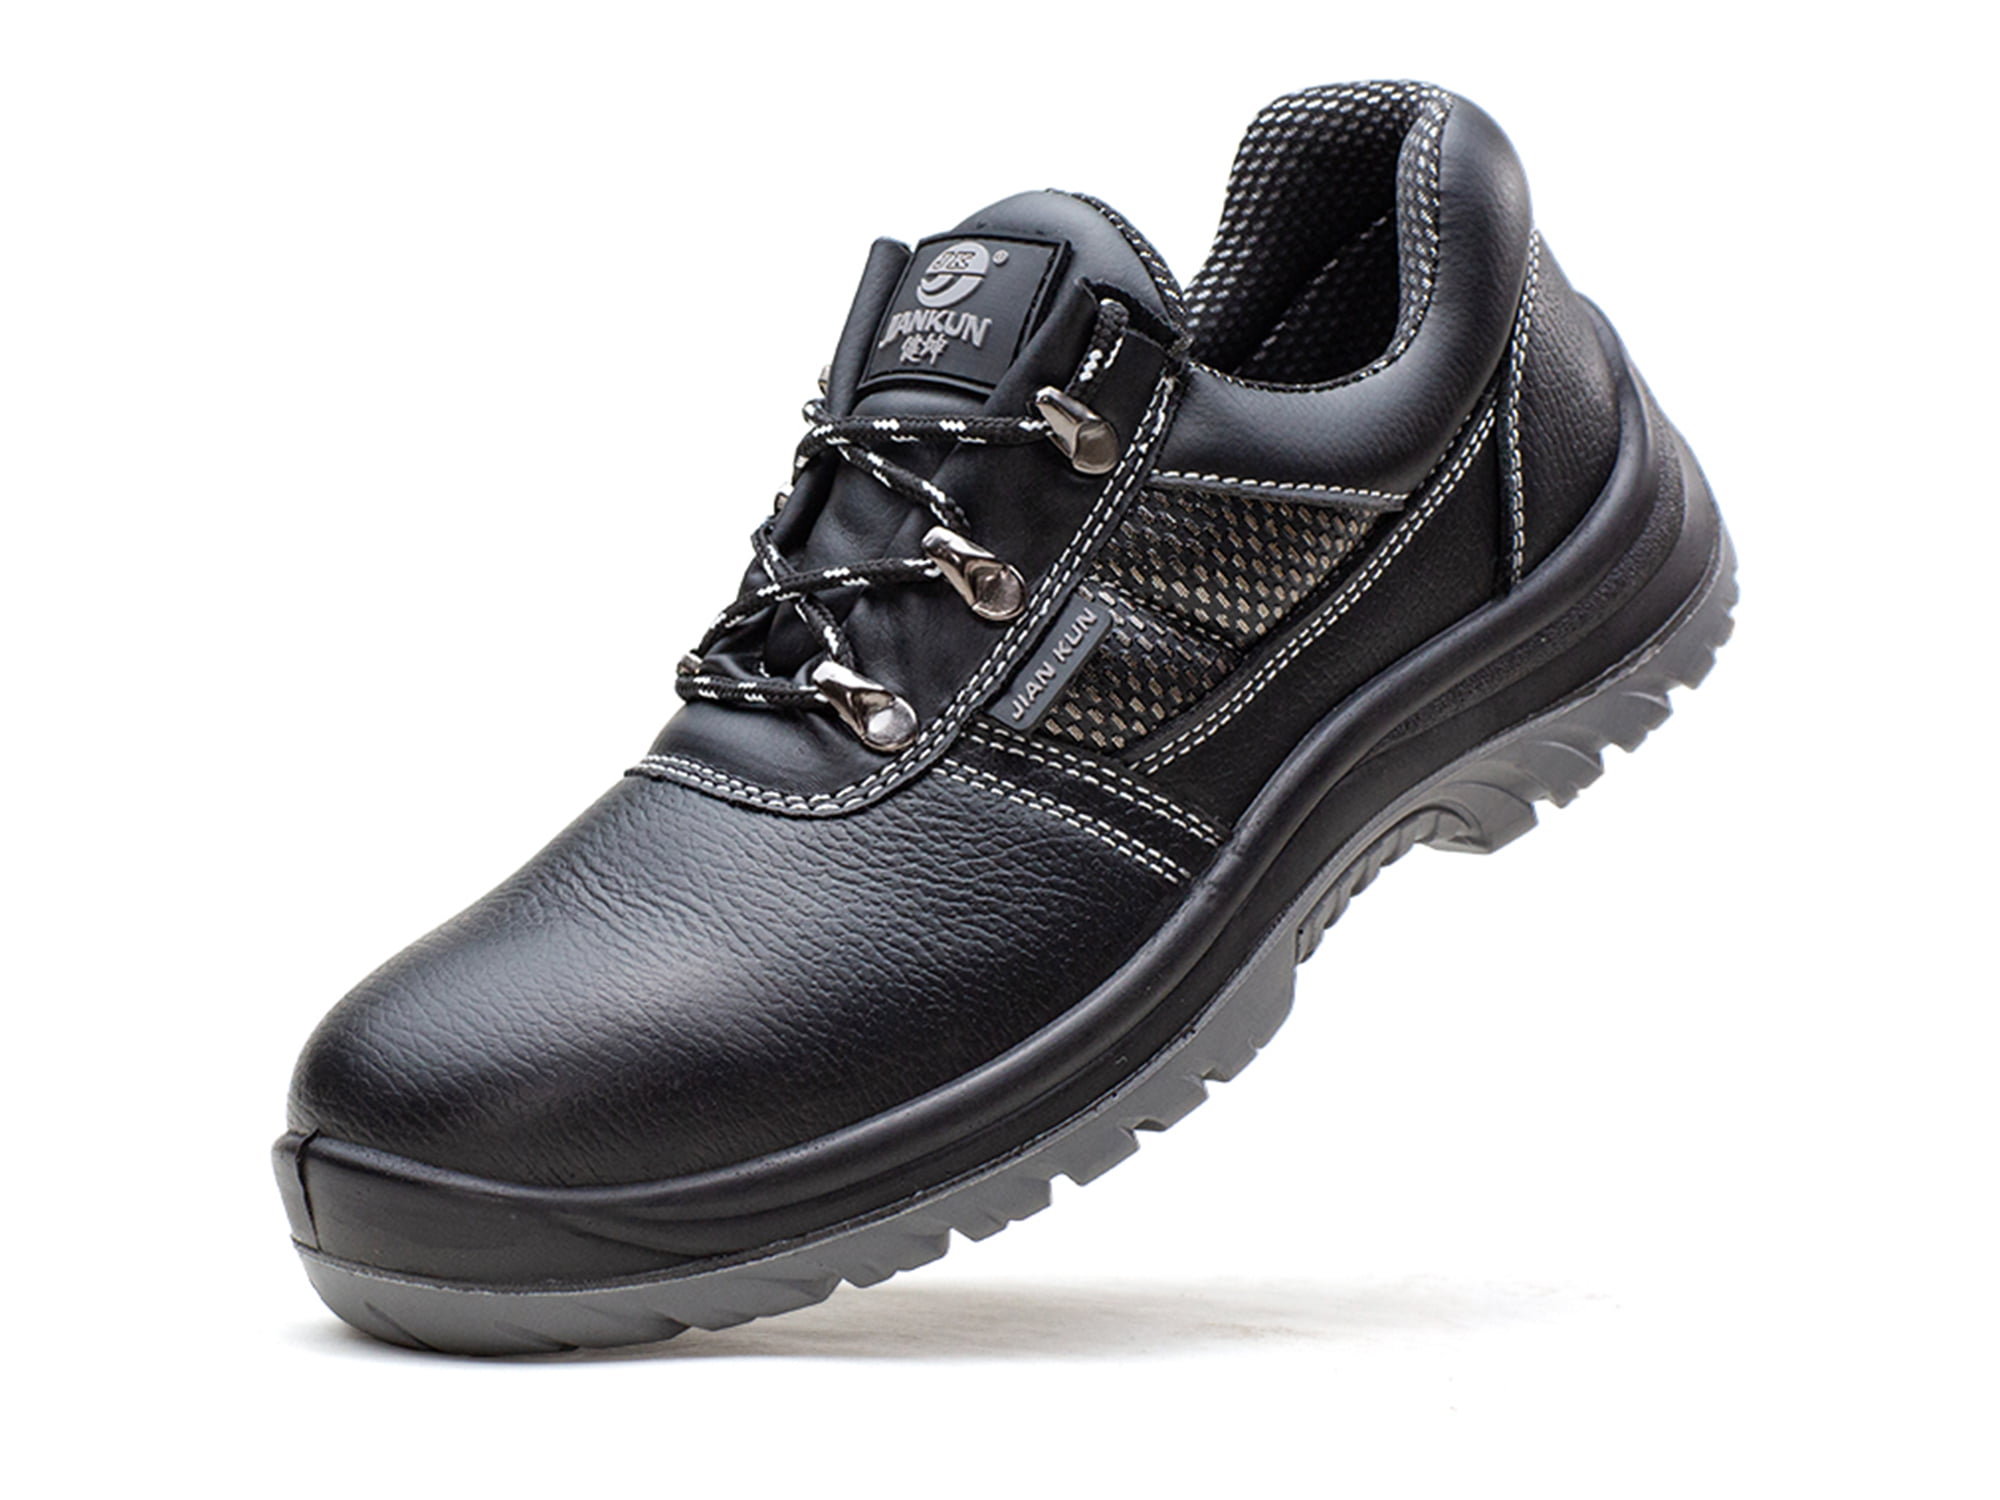 Details about   Mens Work Safety Sneakers Anti-puncture Anti-smash Lightweight Steel Toe Shoes 